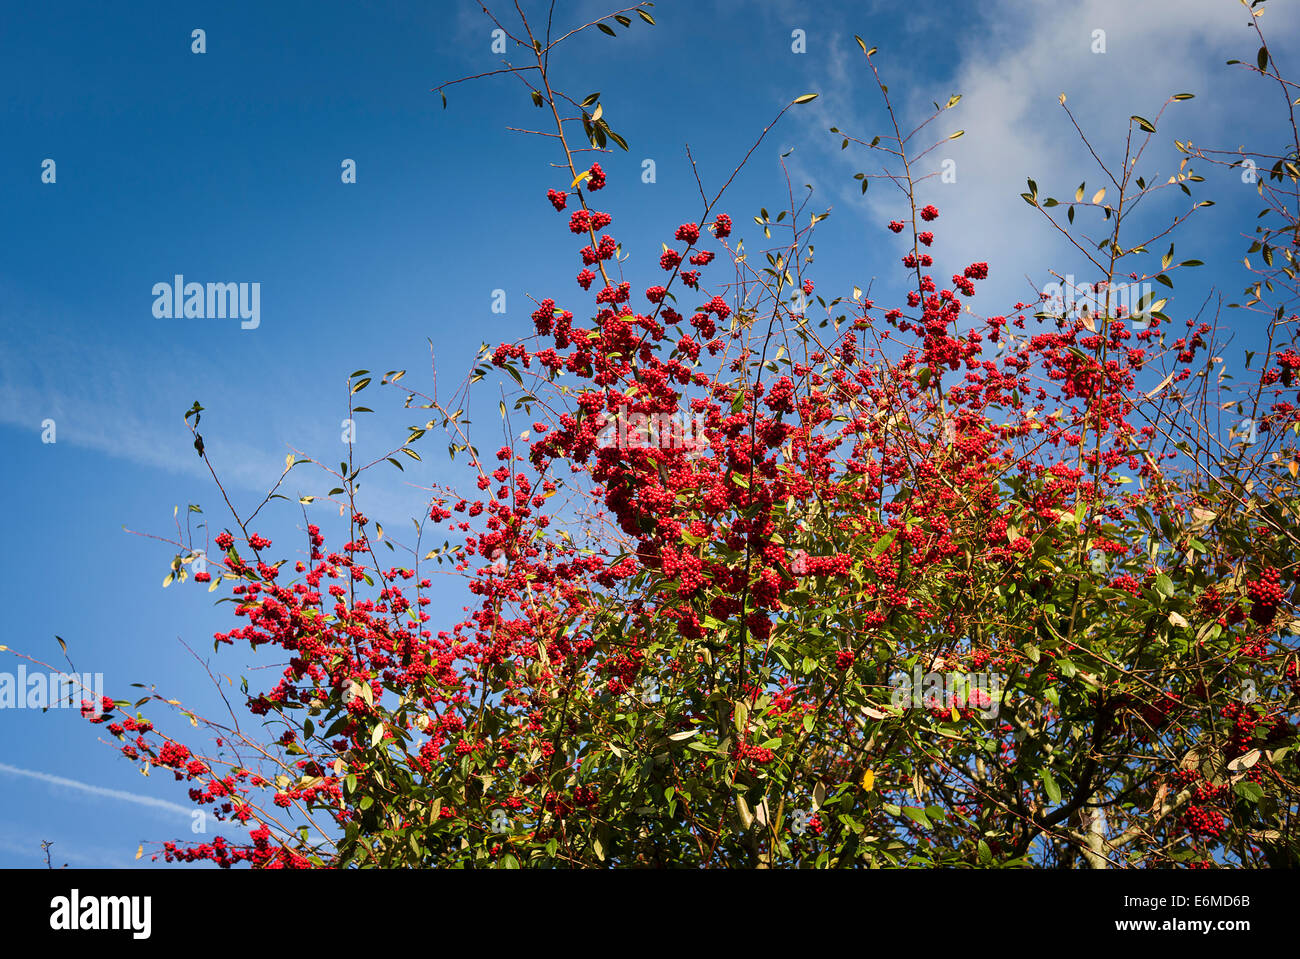 Red berries in autumn on cotonieaster trees in an urban setting Stock Photo